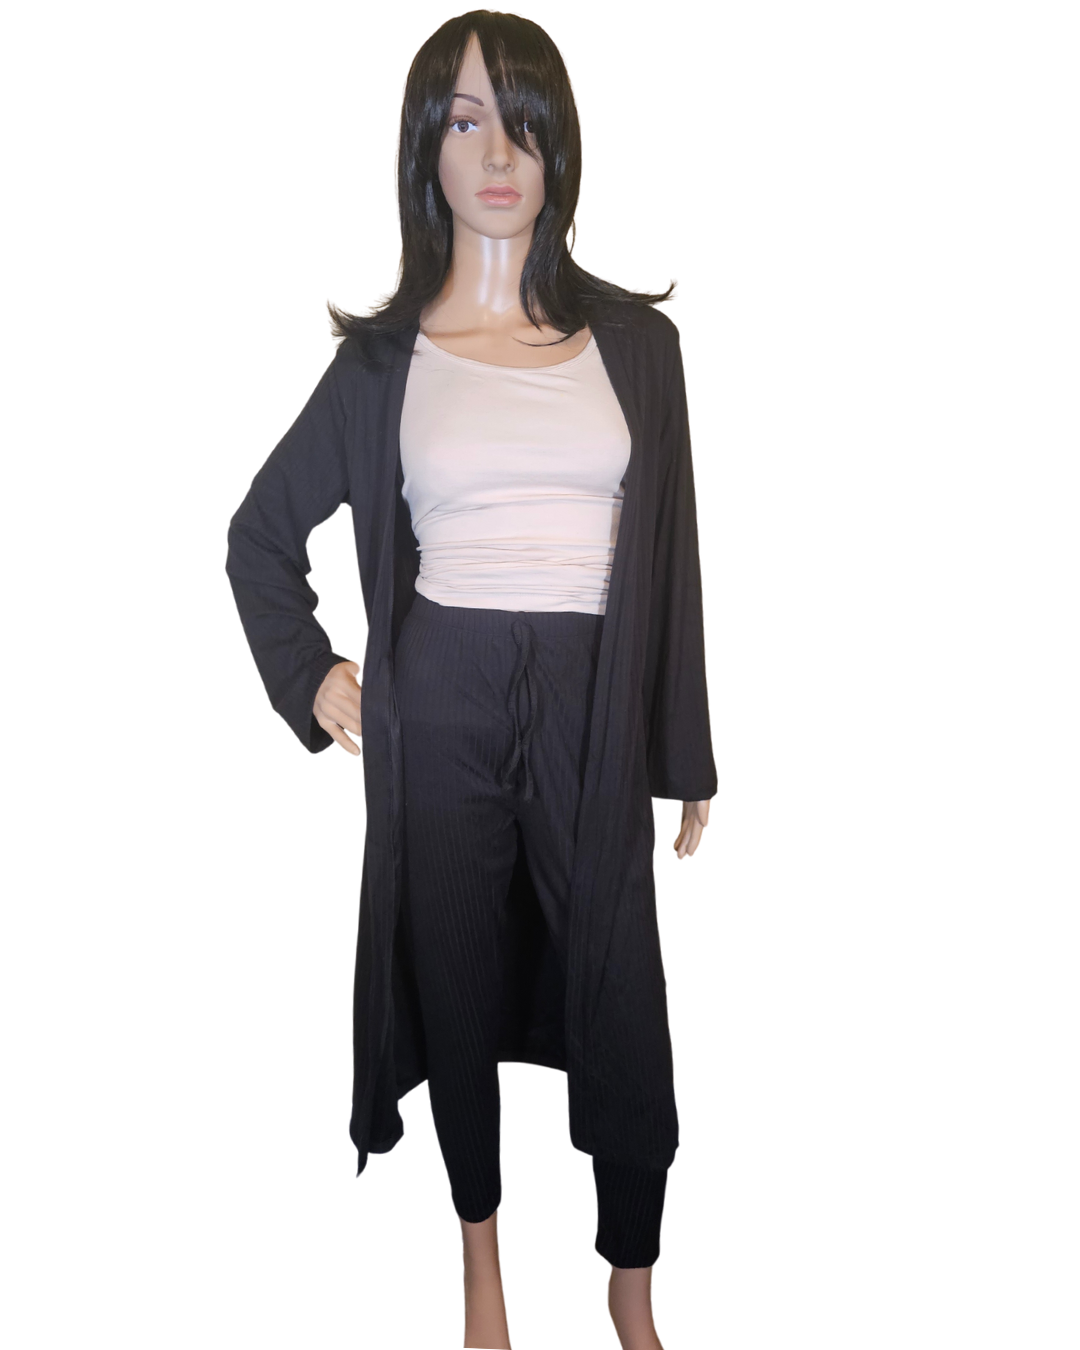 Small-Large in size. black 2 pc cardigan set. the pants are legging pants with a decorative string in the front.